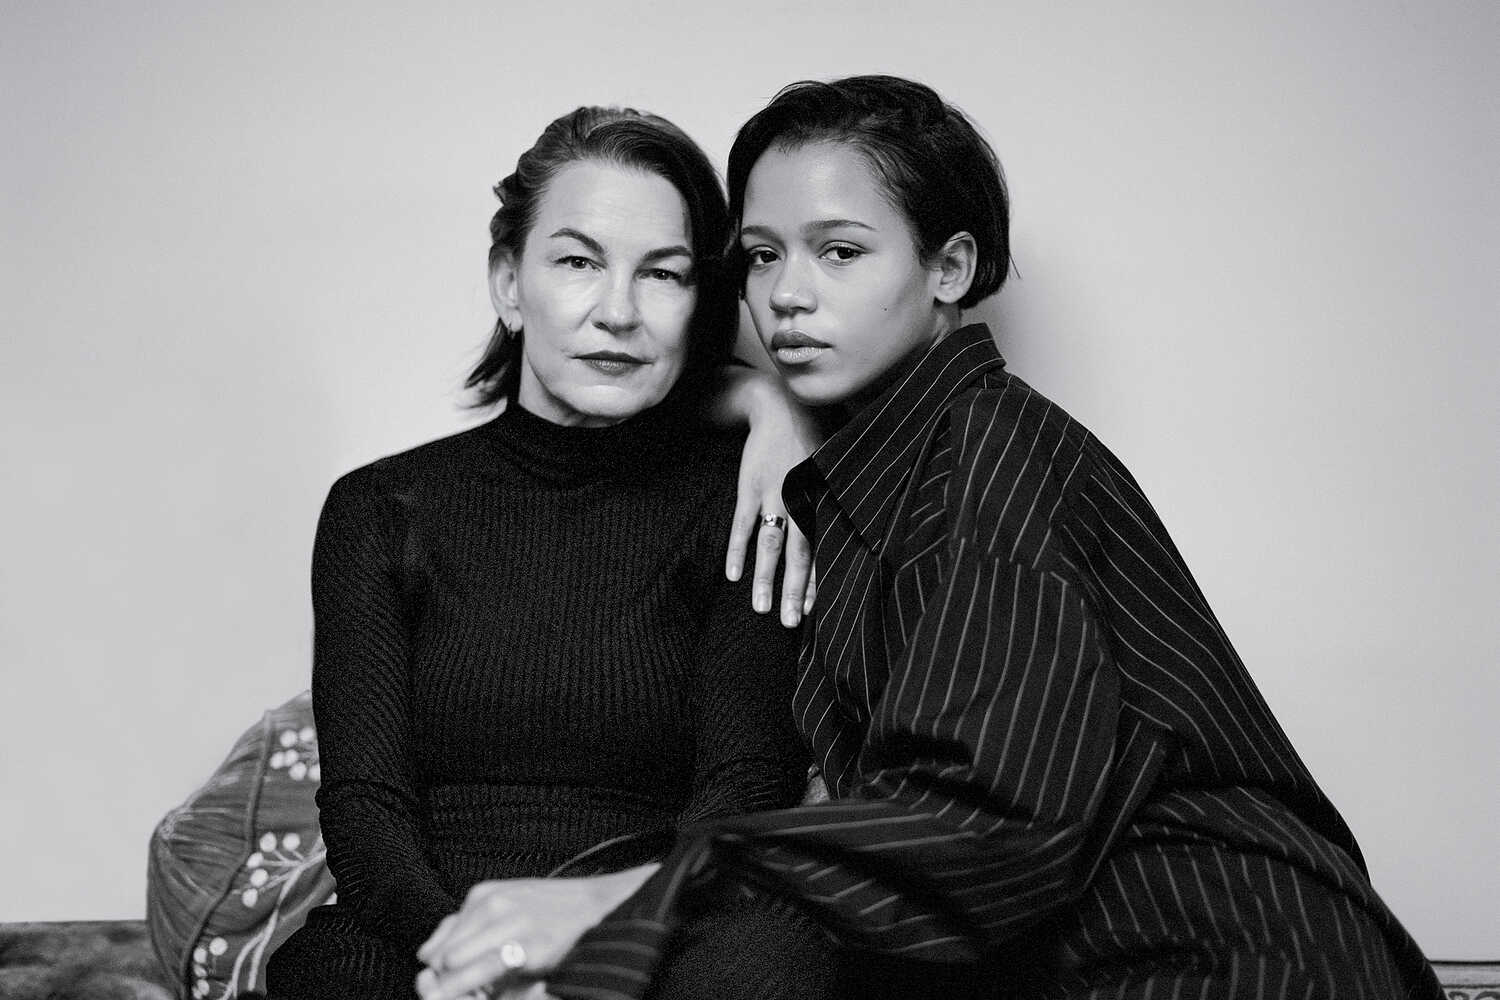 The artist Elizabeth Peyton (left) and the actress Taylor Russell, photographed in New York City on Dec. 6, 2022.